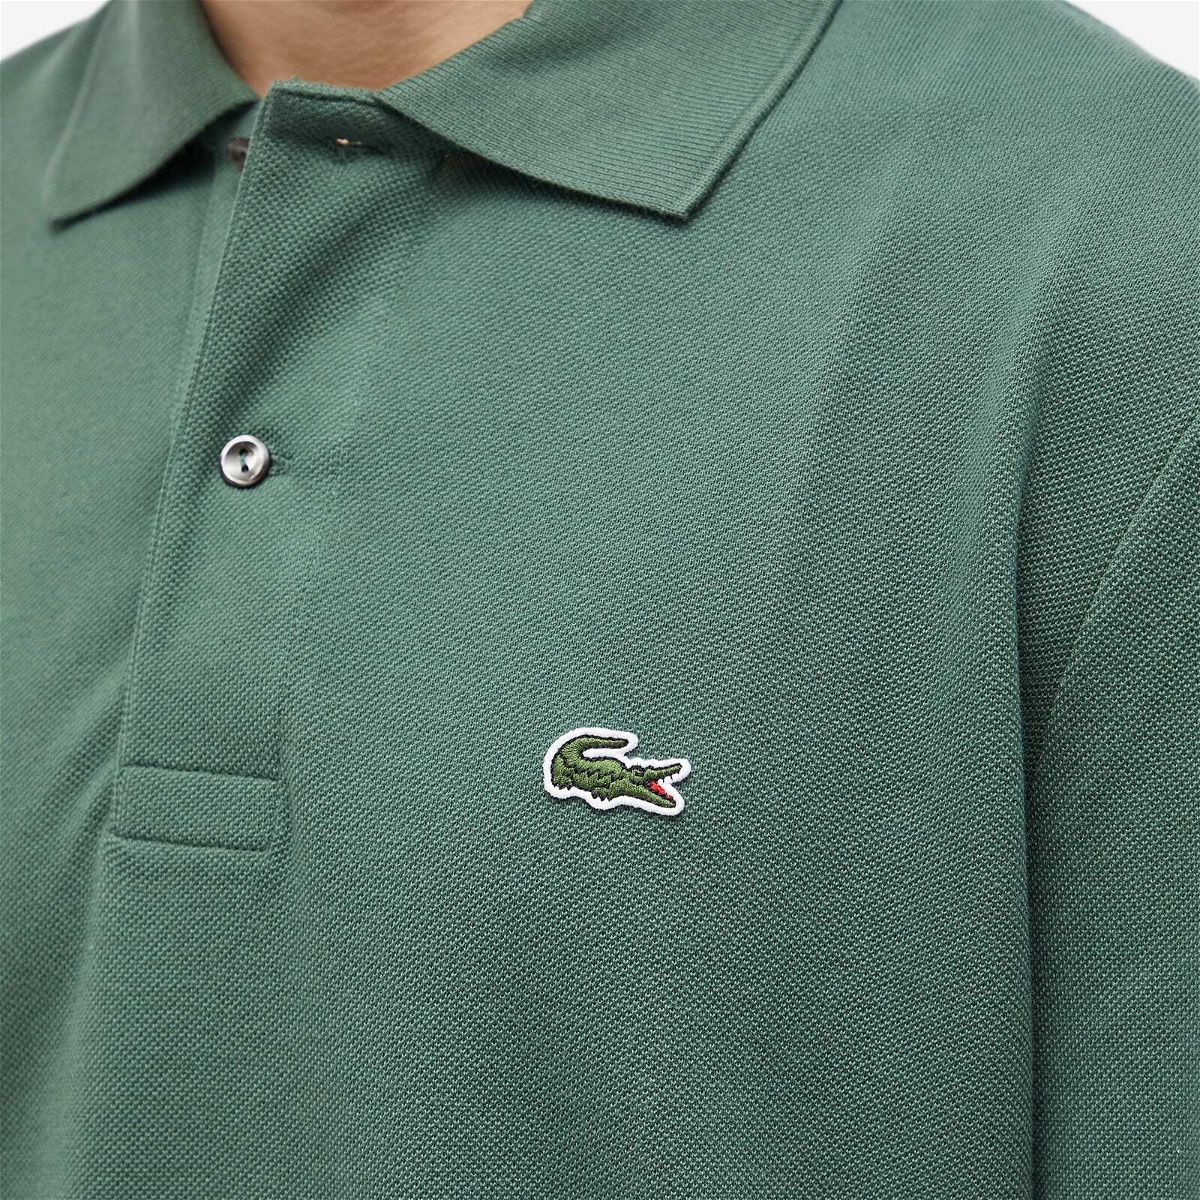 Lacoste Men's Classic L13.12 Long Sleeve Polo Shirt in Sequoia Lacoste